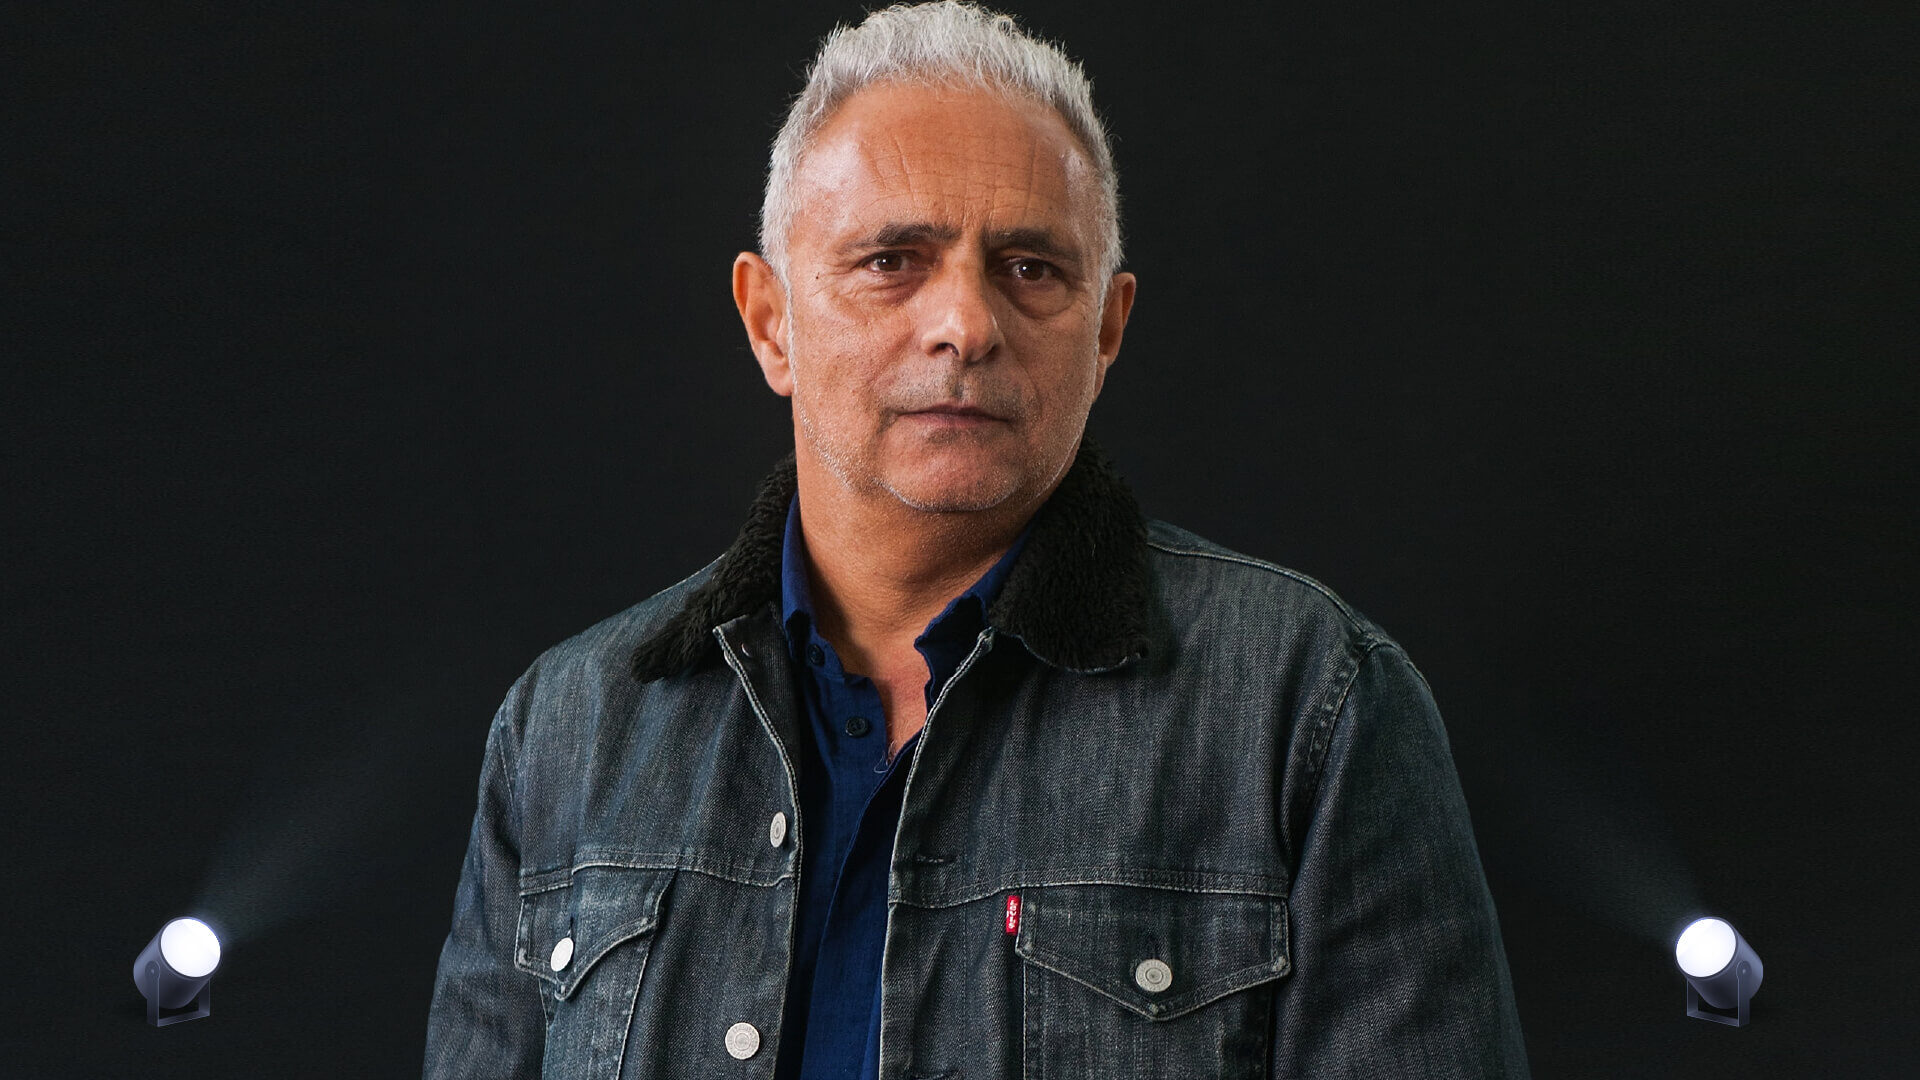 What I’ve Learned – InTouch Online speaks to Hanif Kureishi (Philosophy, 1977), one of Britain’s foremost playwrights, screenwriters and novelists.